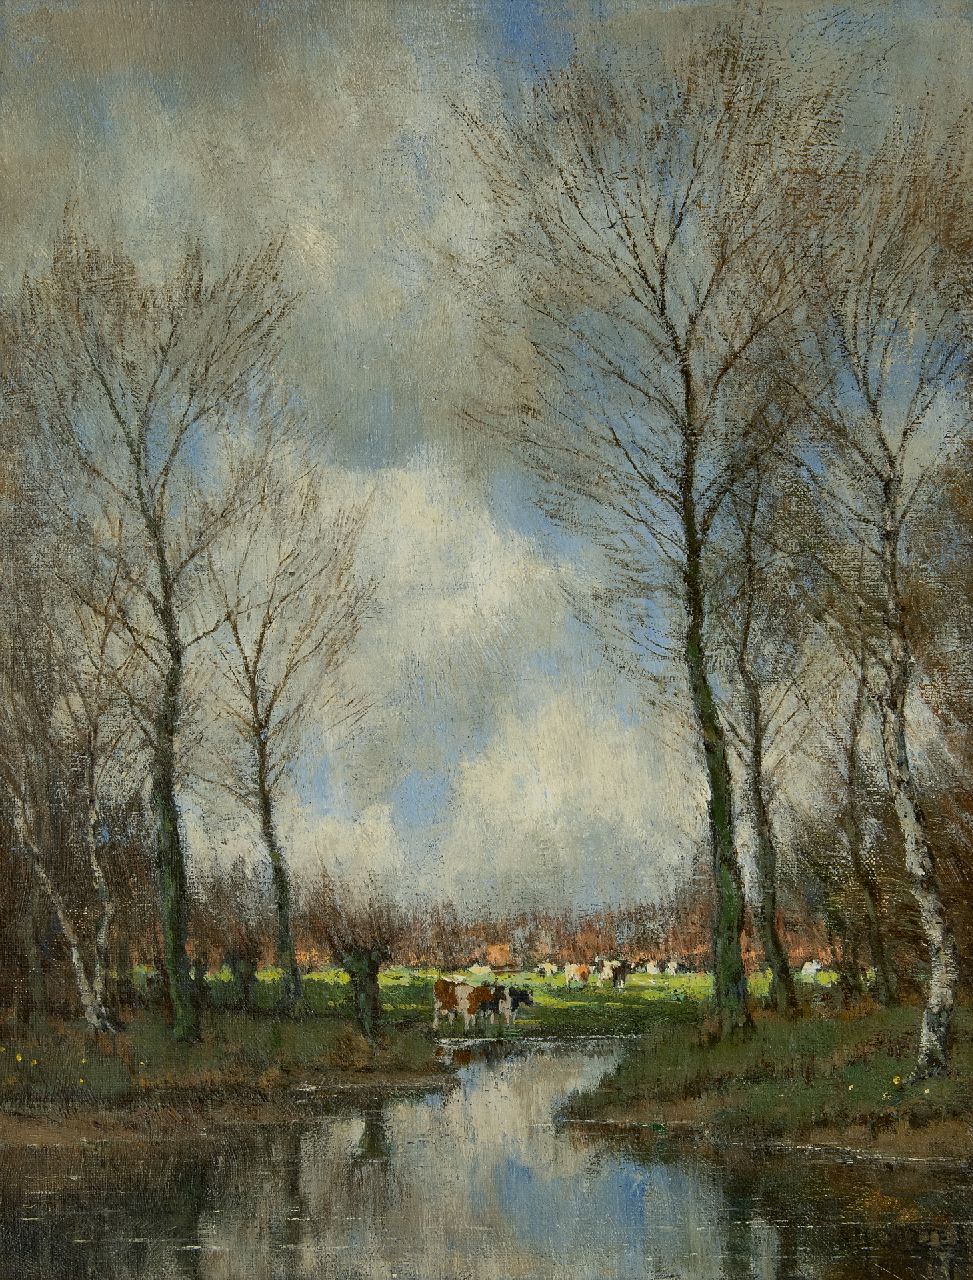 Gorter A.M.  | 'Arnold' Marc Gorter | Paintings offered for sale | Cows near the Vordense Beek, oil on canvas 42.2 x 32.6 cm, signed l.r. (twice)